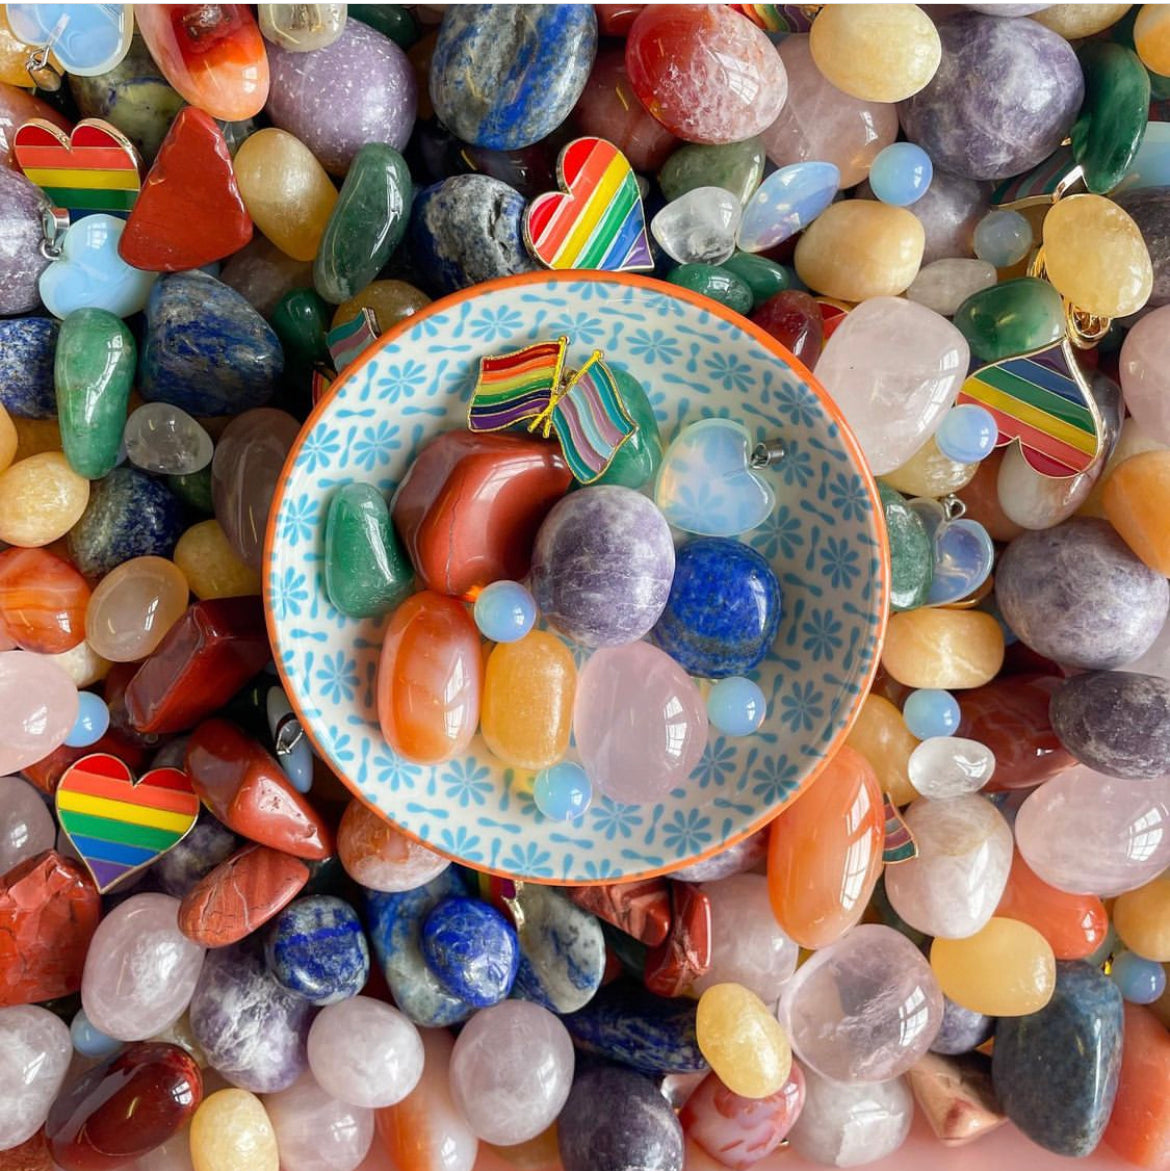 a collection of rainbow crystals for pride month with red jasper, organge calcite, green aventurine, lapis lazuli, lepidolite, rose qaurtz and opalite with a rainbow flag badge for LGBTQ in a bowl